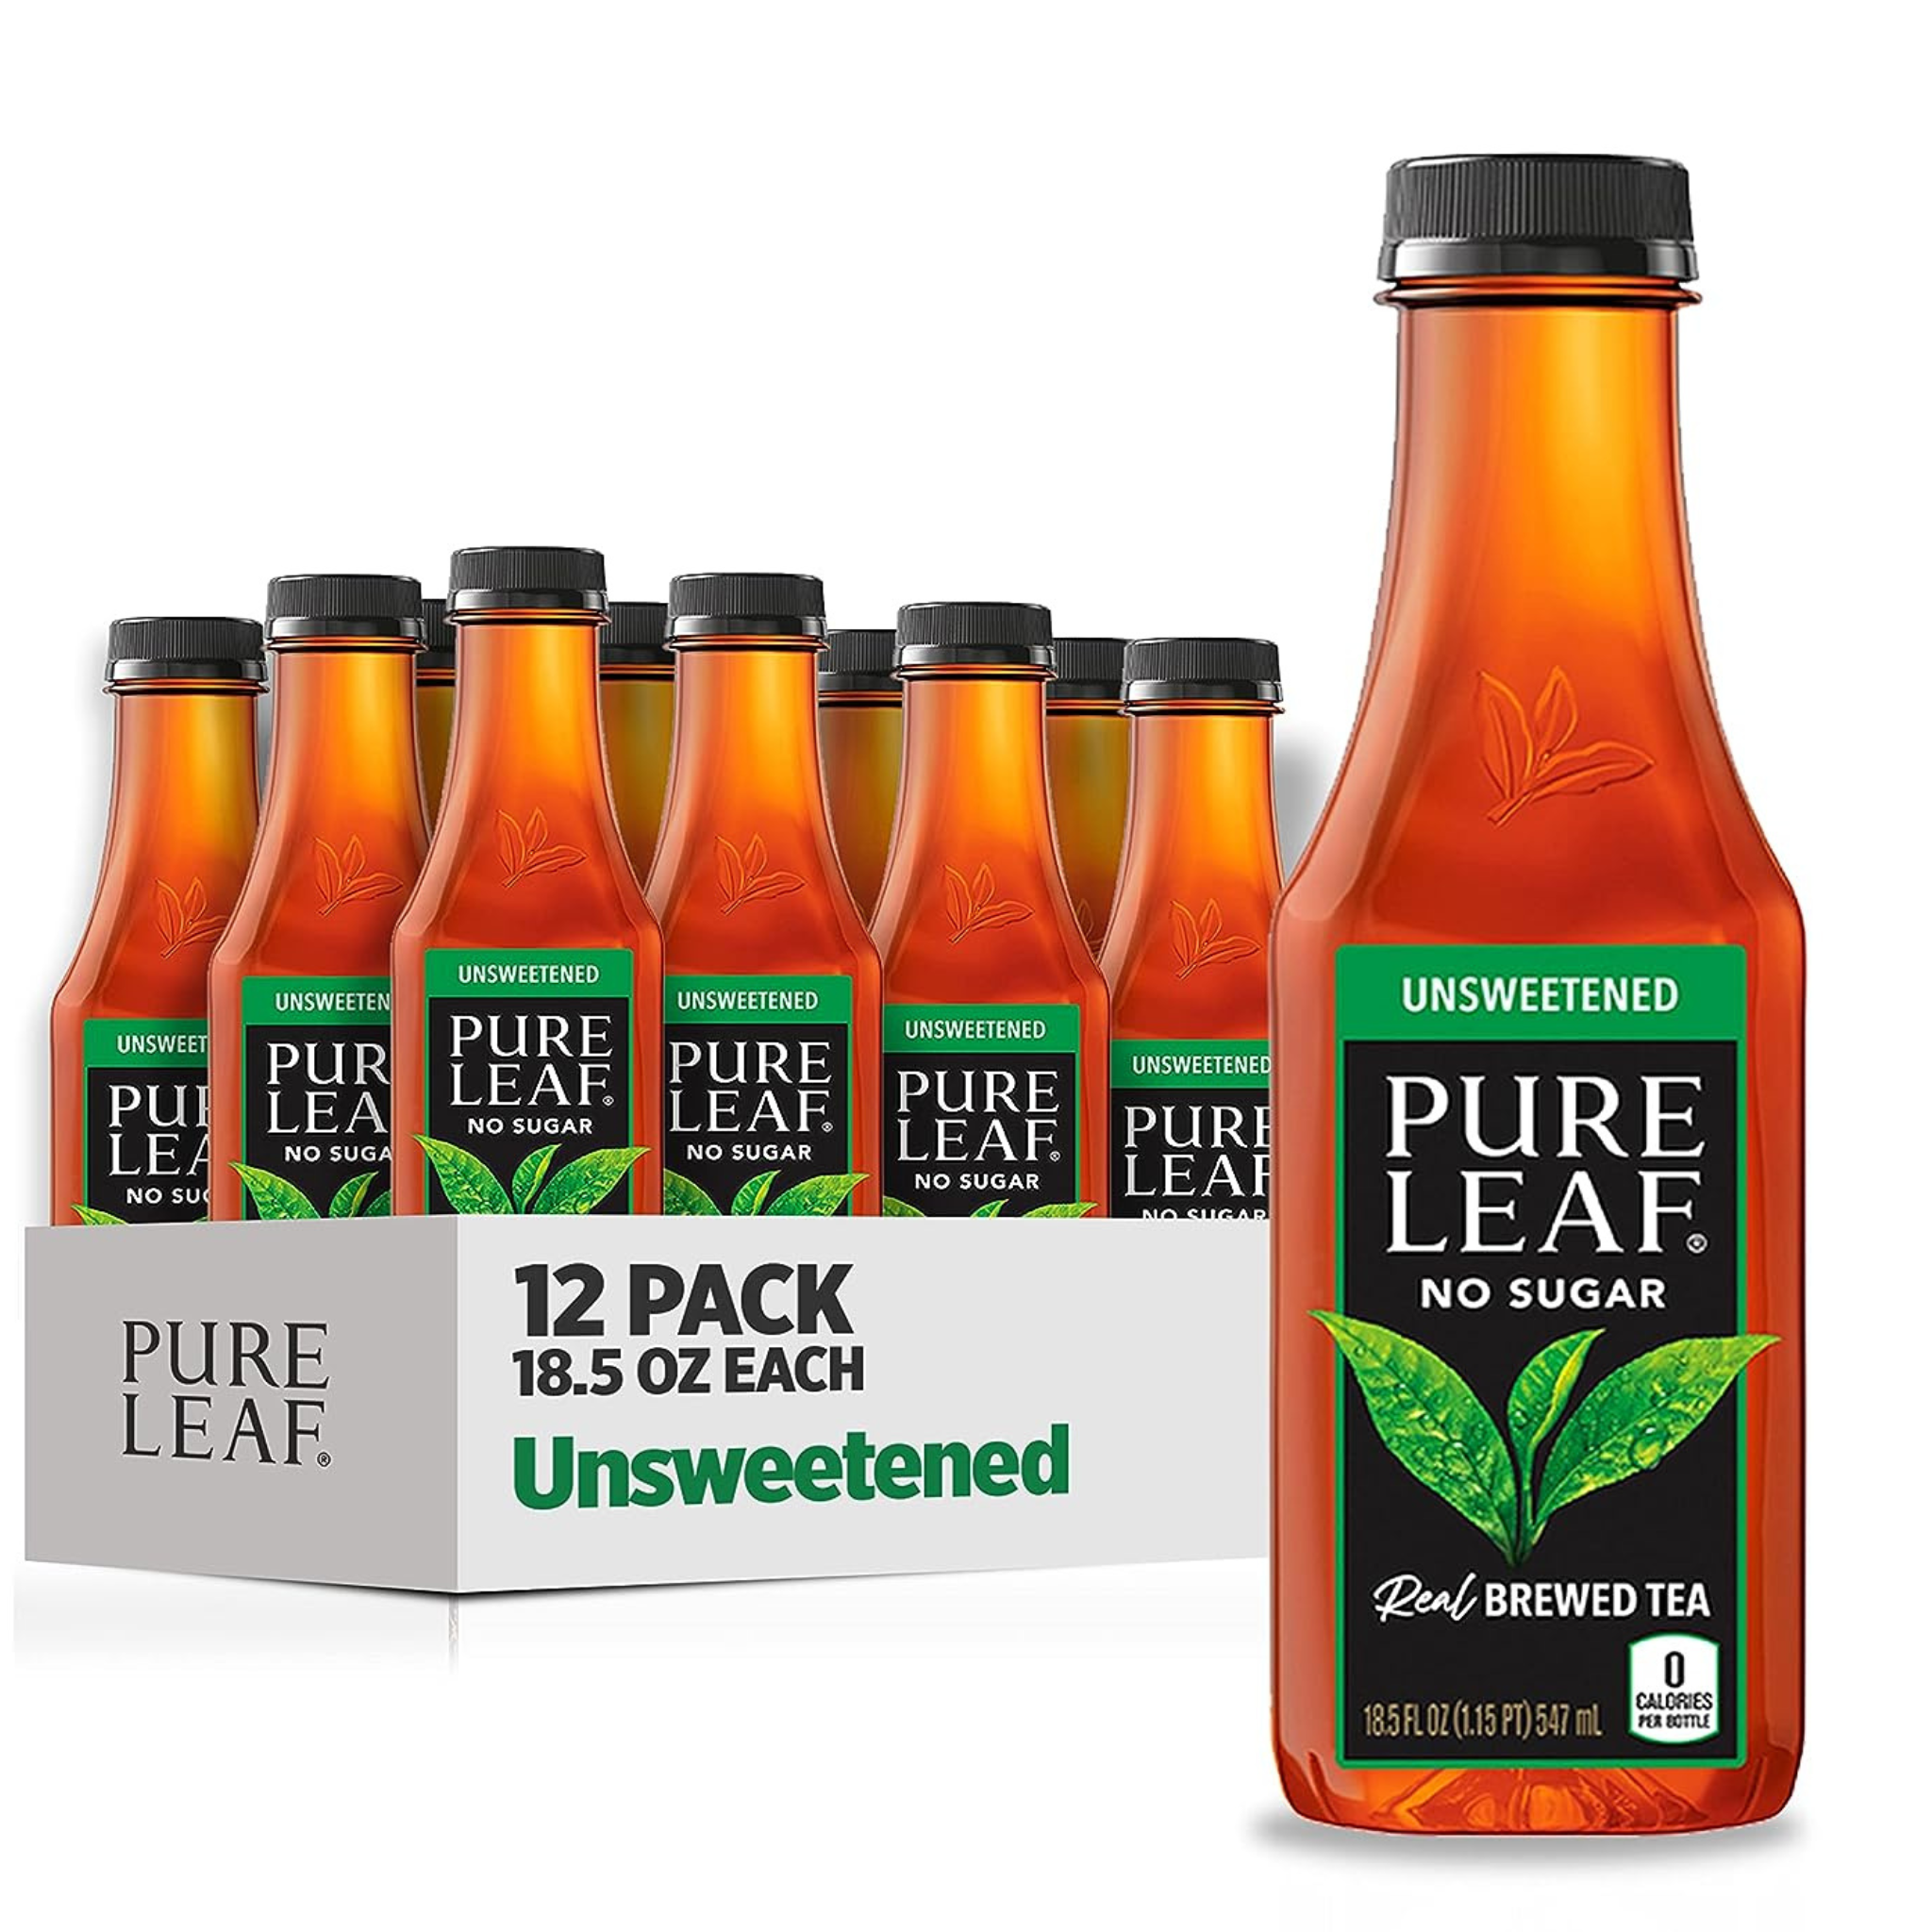 12 Pack Of Pure Leaf Unsweetened Iced Tea 18.5oz Bottles